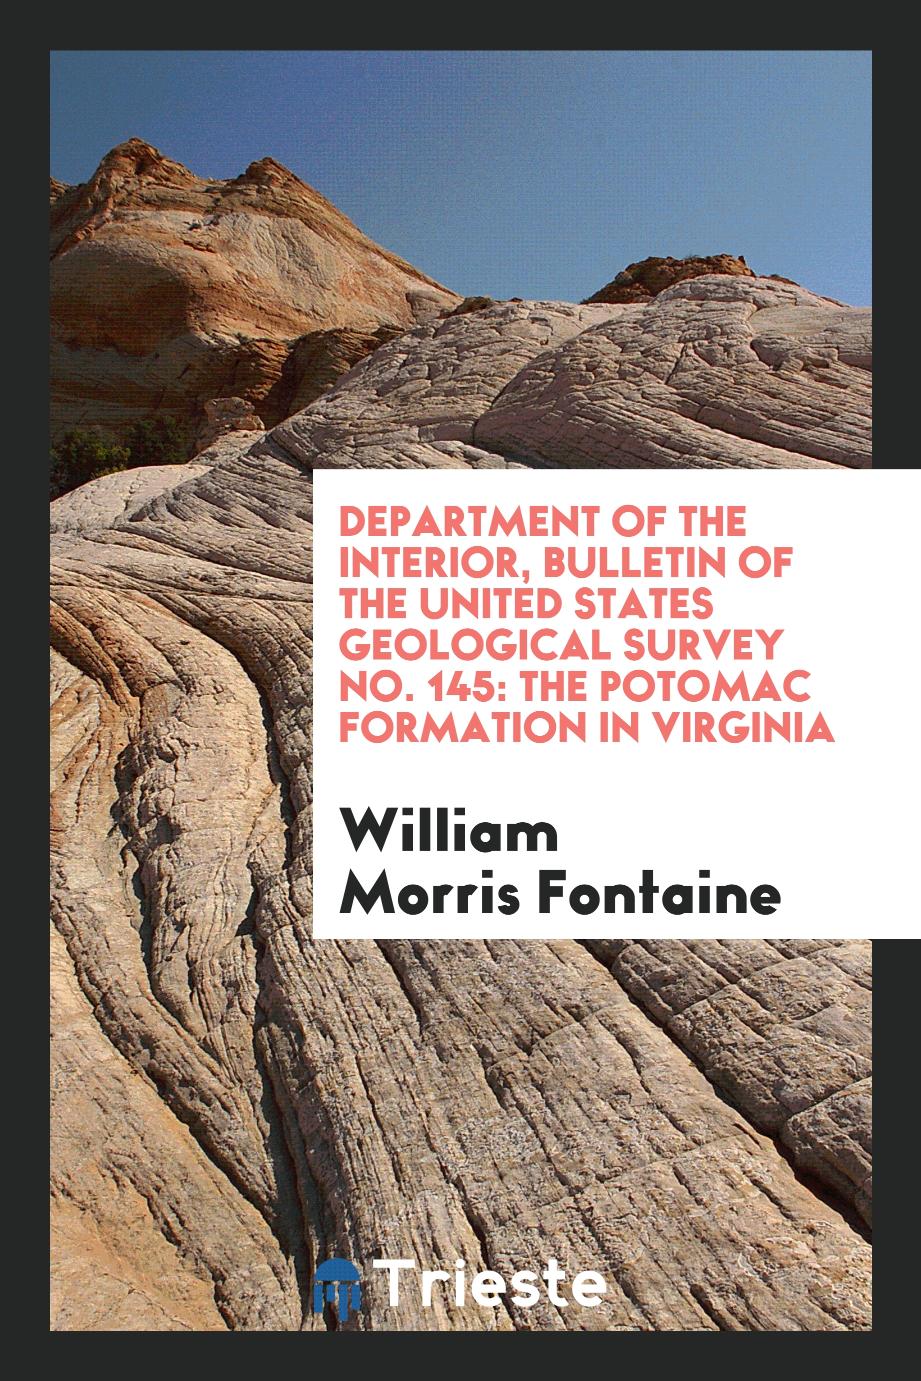 Department of the Interior, Bulletin of the United States Geological Survey No. 145: The Potomac Formation in Virginia